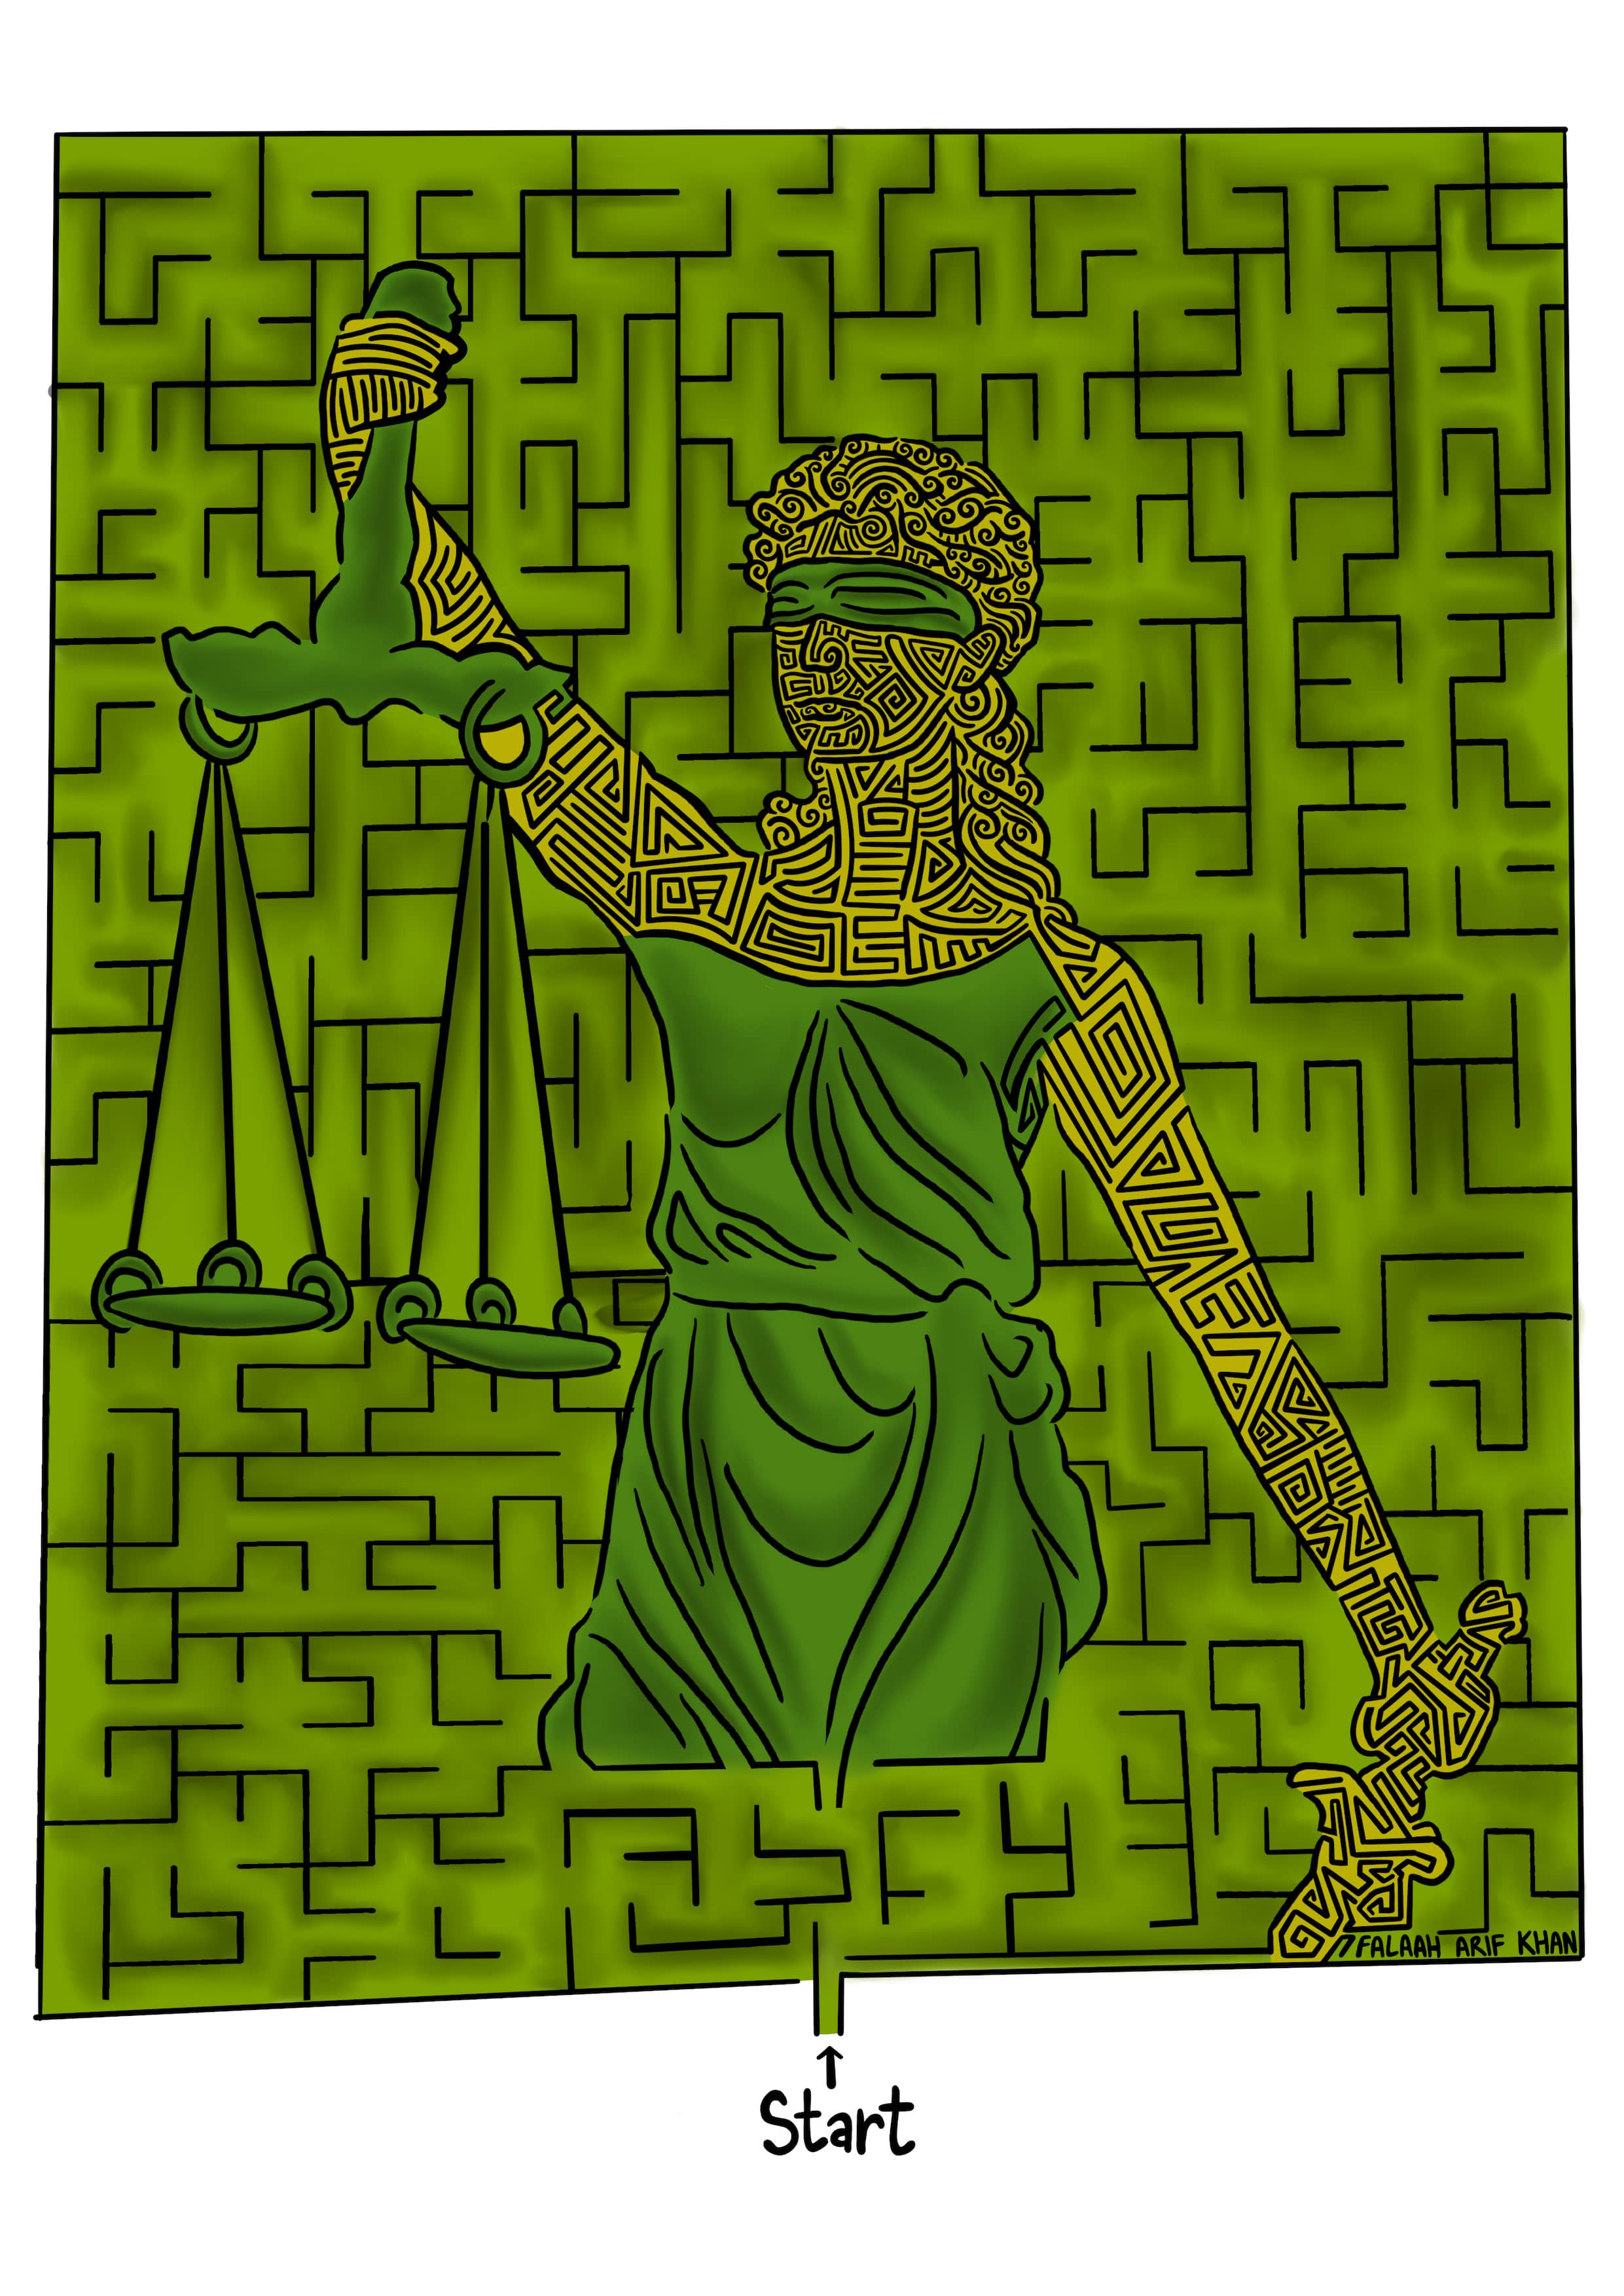 Maze overlaying female personification of Justice who is blindfolded and carrying scales